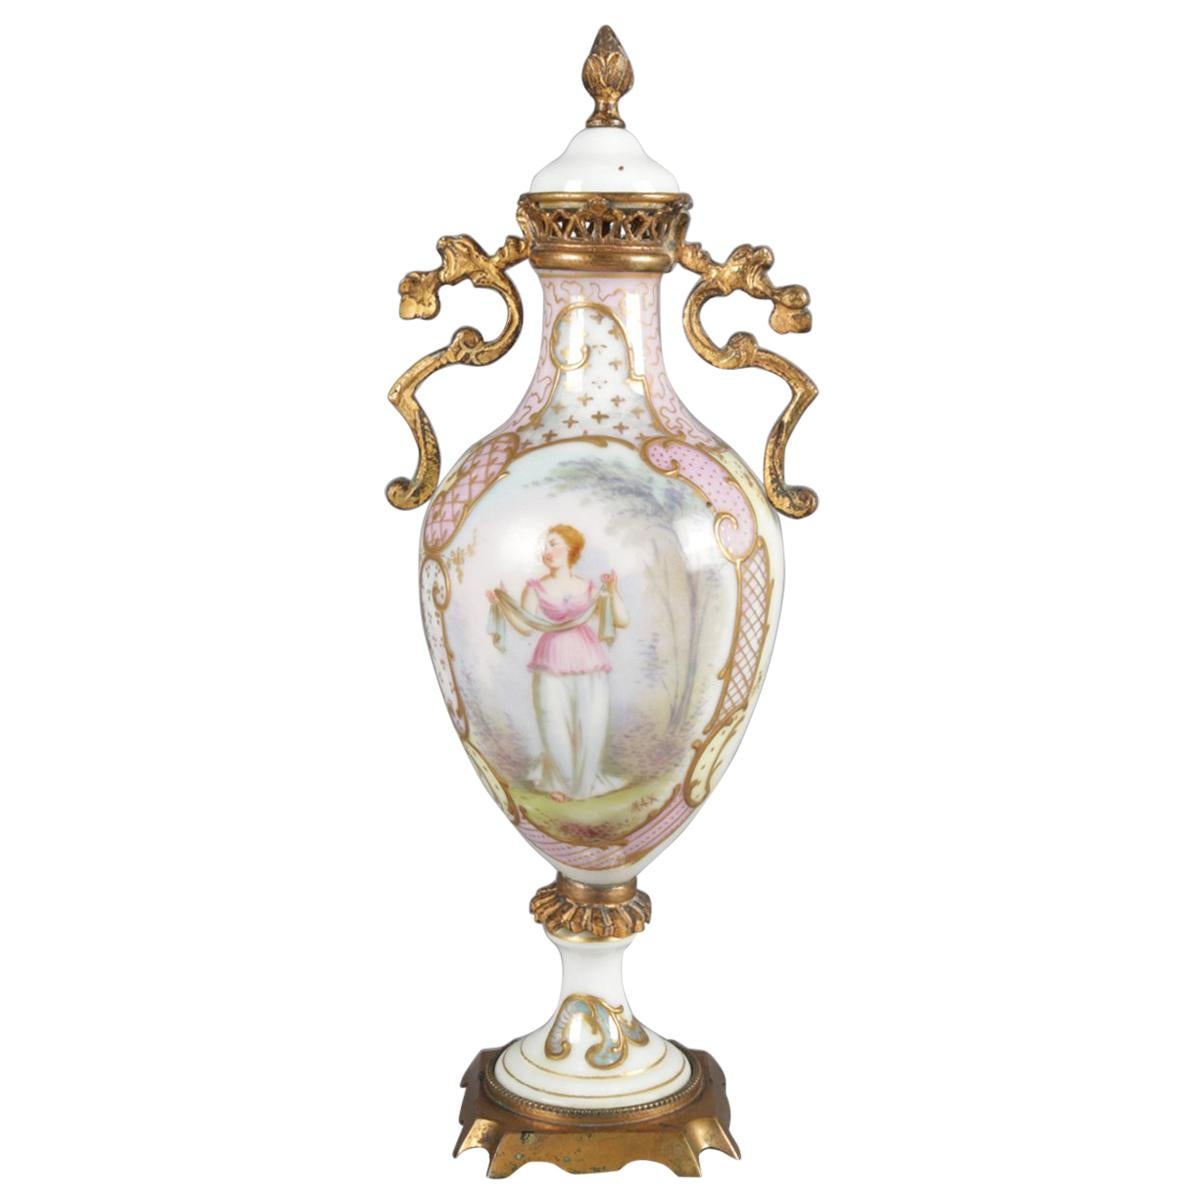 Antique French Sèvres School Hand-Painted and Gilt Porcelain and Bronze Urn